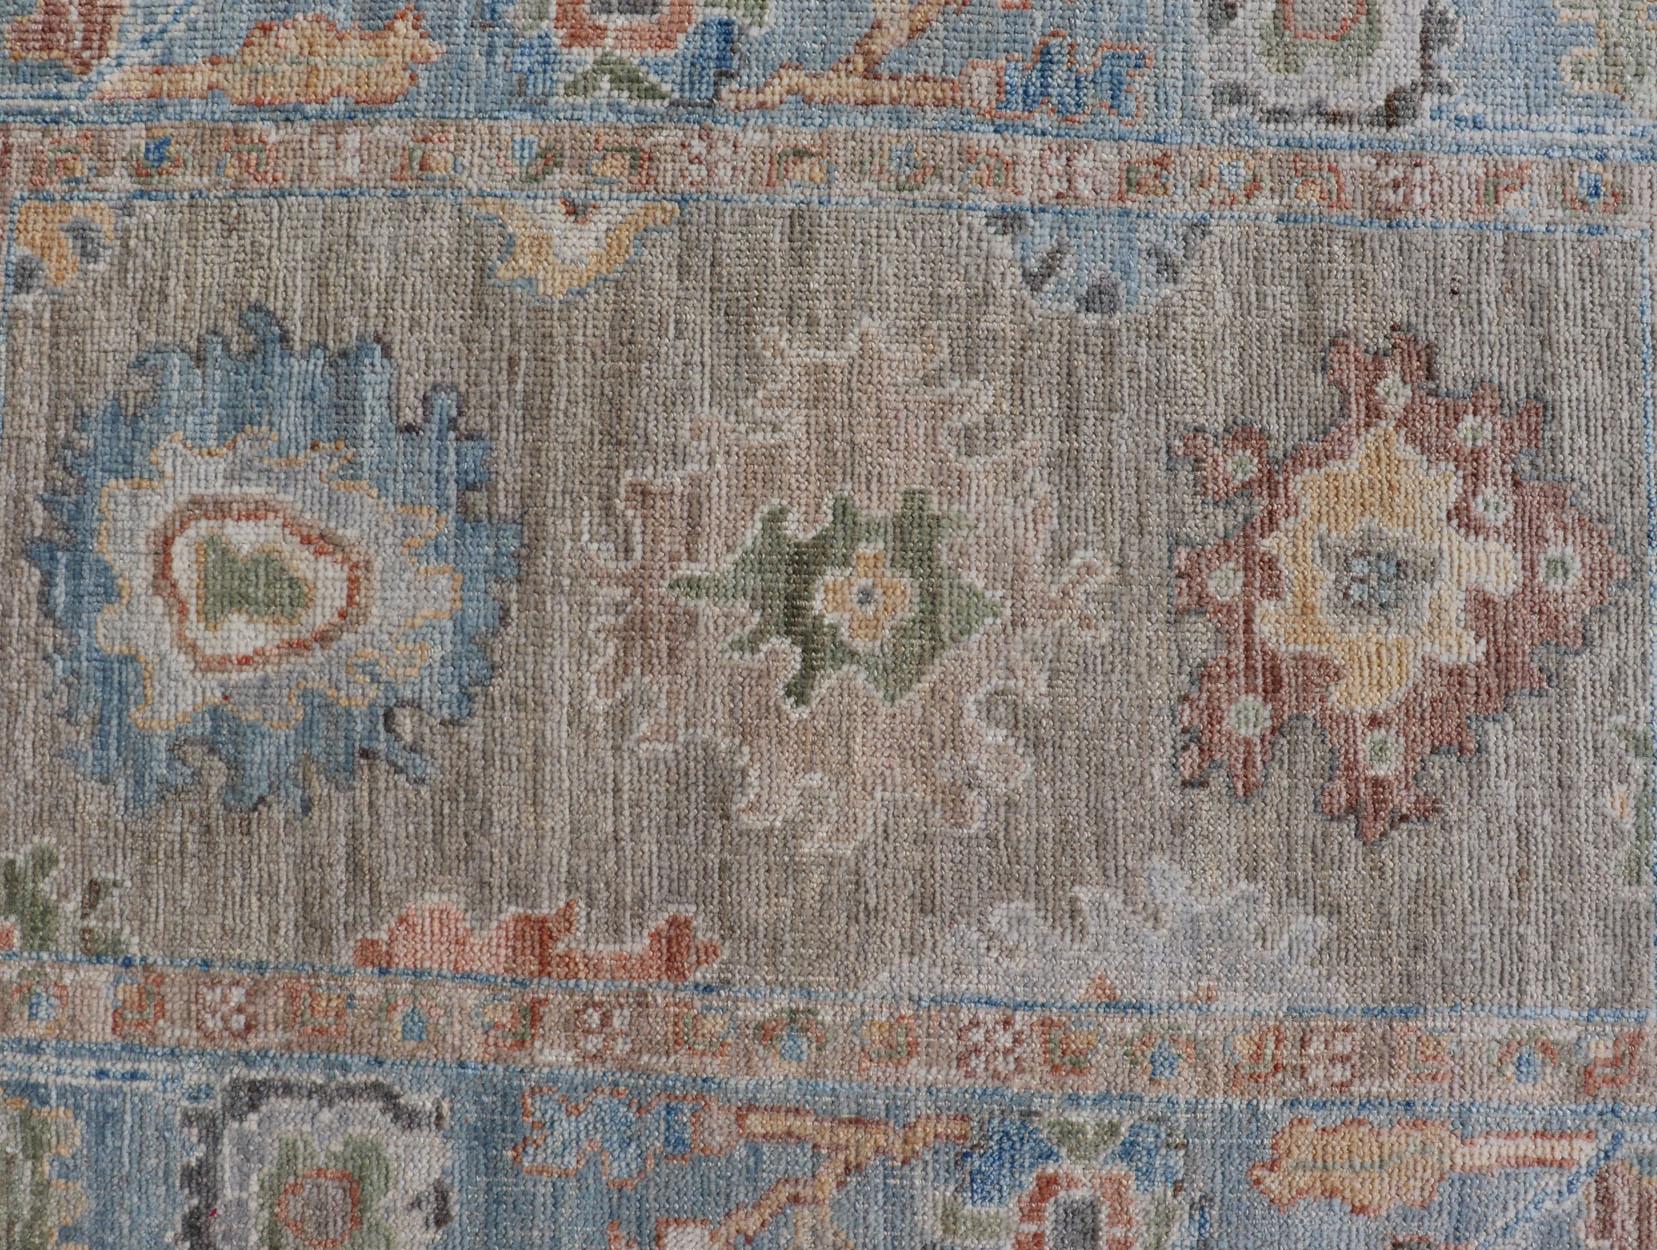 Measures: 2'7 x 4'0 
Modern Floral Oushak With Sandy-Brown Background and A Sky Blue Border. Keivan Woven Arts; rug AWR-12378 Country of Origin: Afghanistan Type: Oushak Design: Floral, Arabesque, All-Over. 

This piece gives a modern vibrancy to